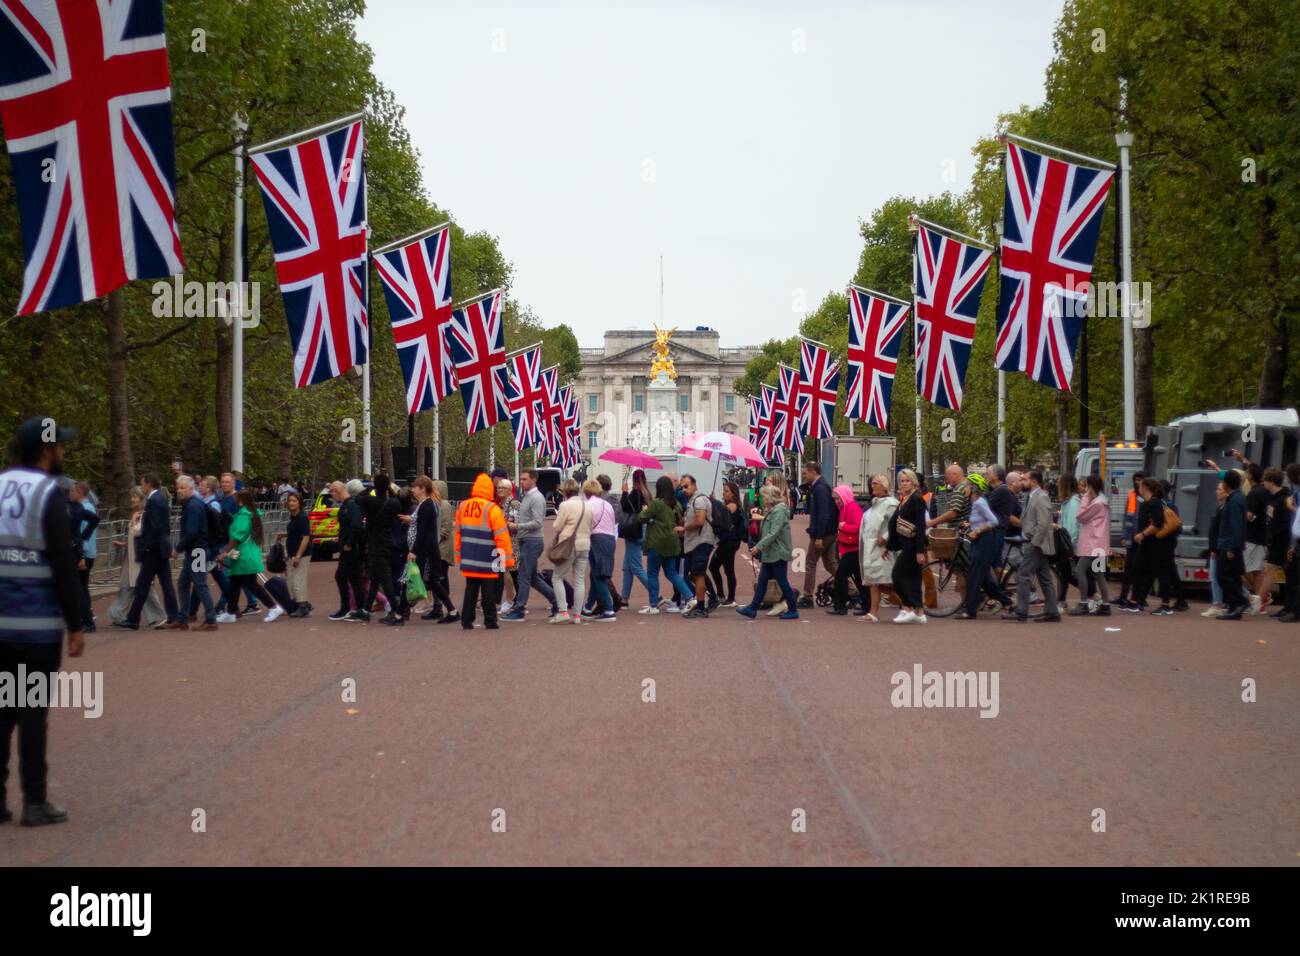 A crowd of people walking on the street during Queen Elizabeth II's funeral preparations Stock Photo